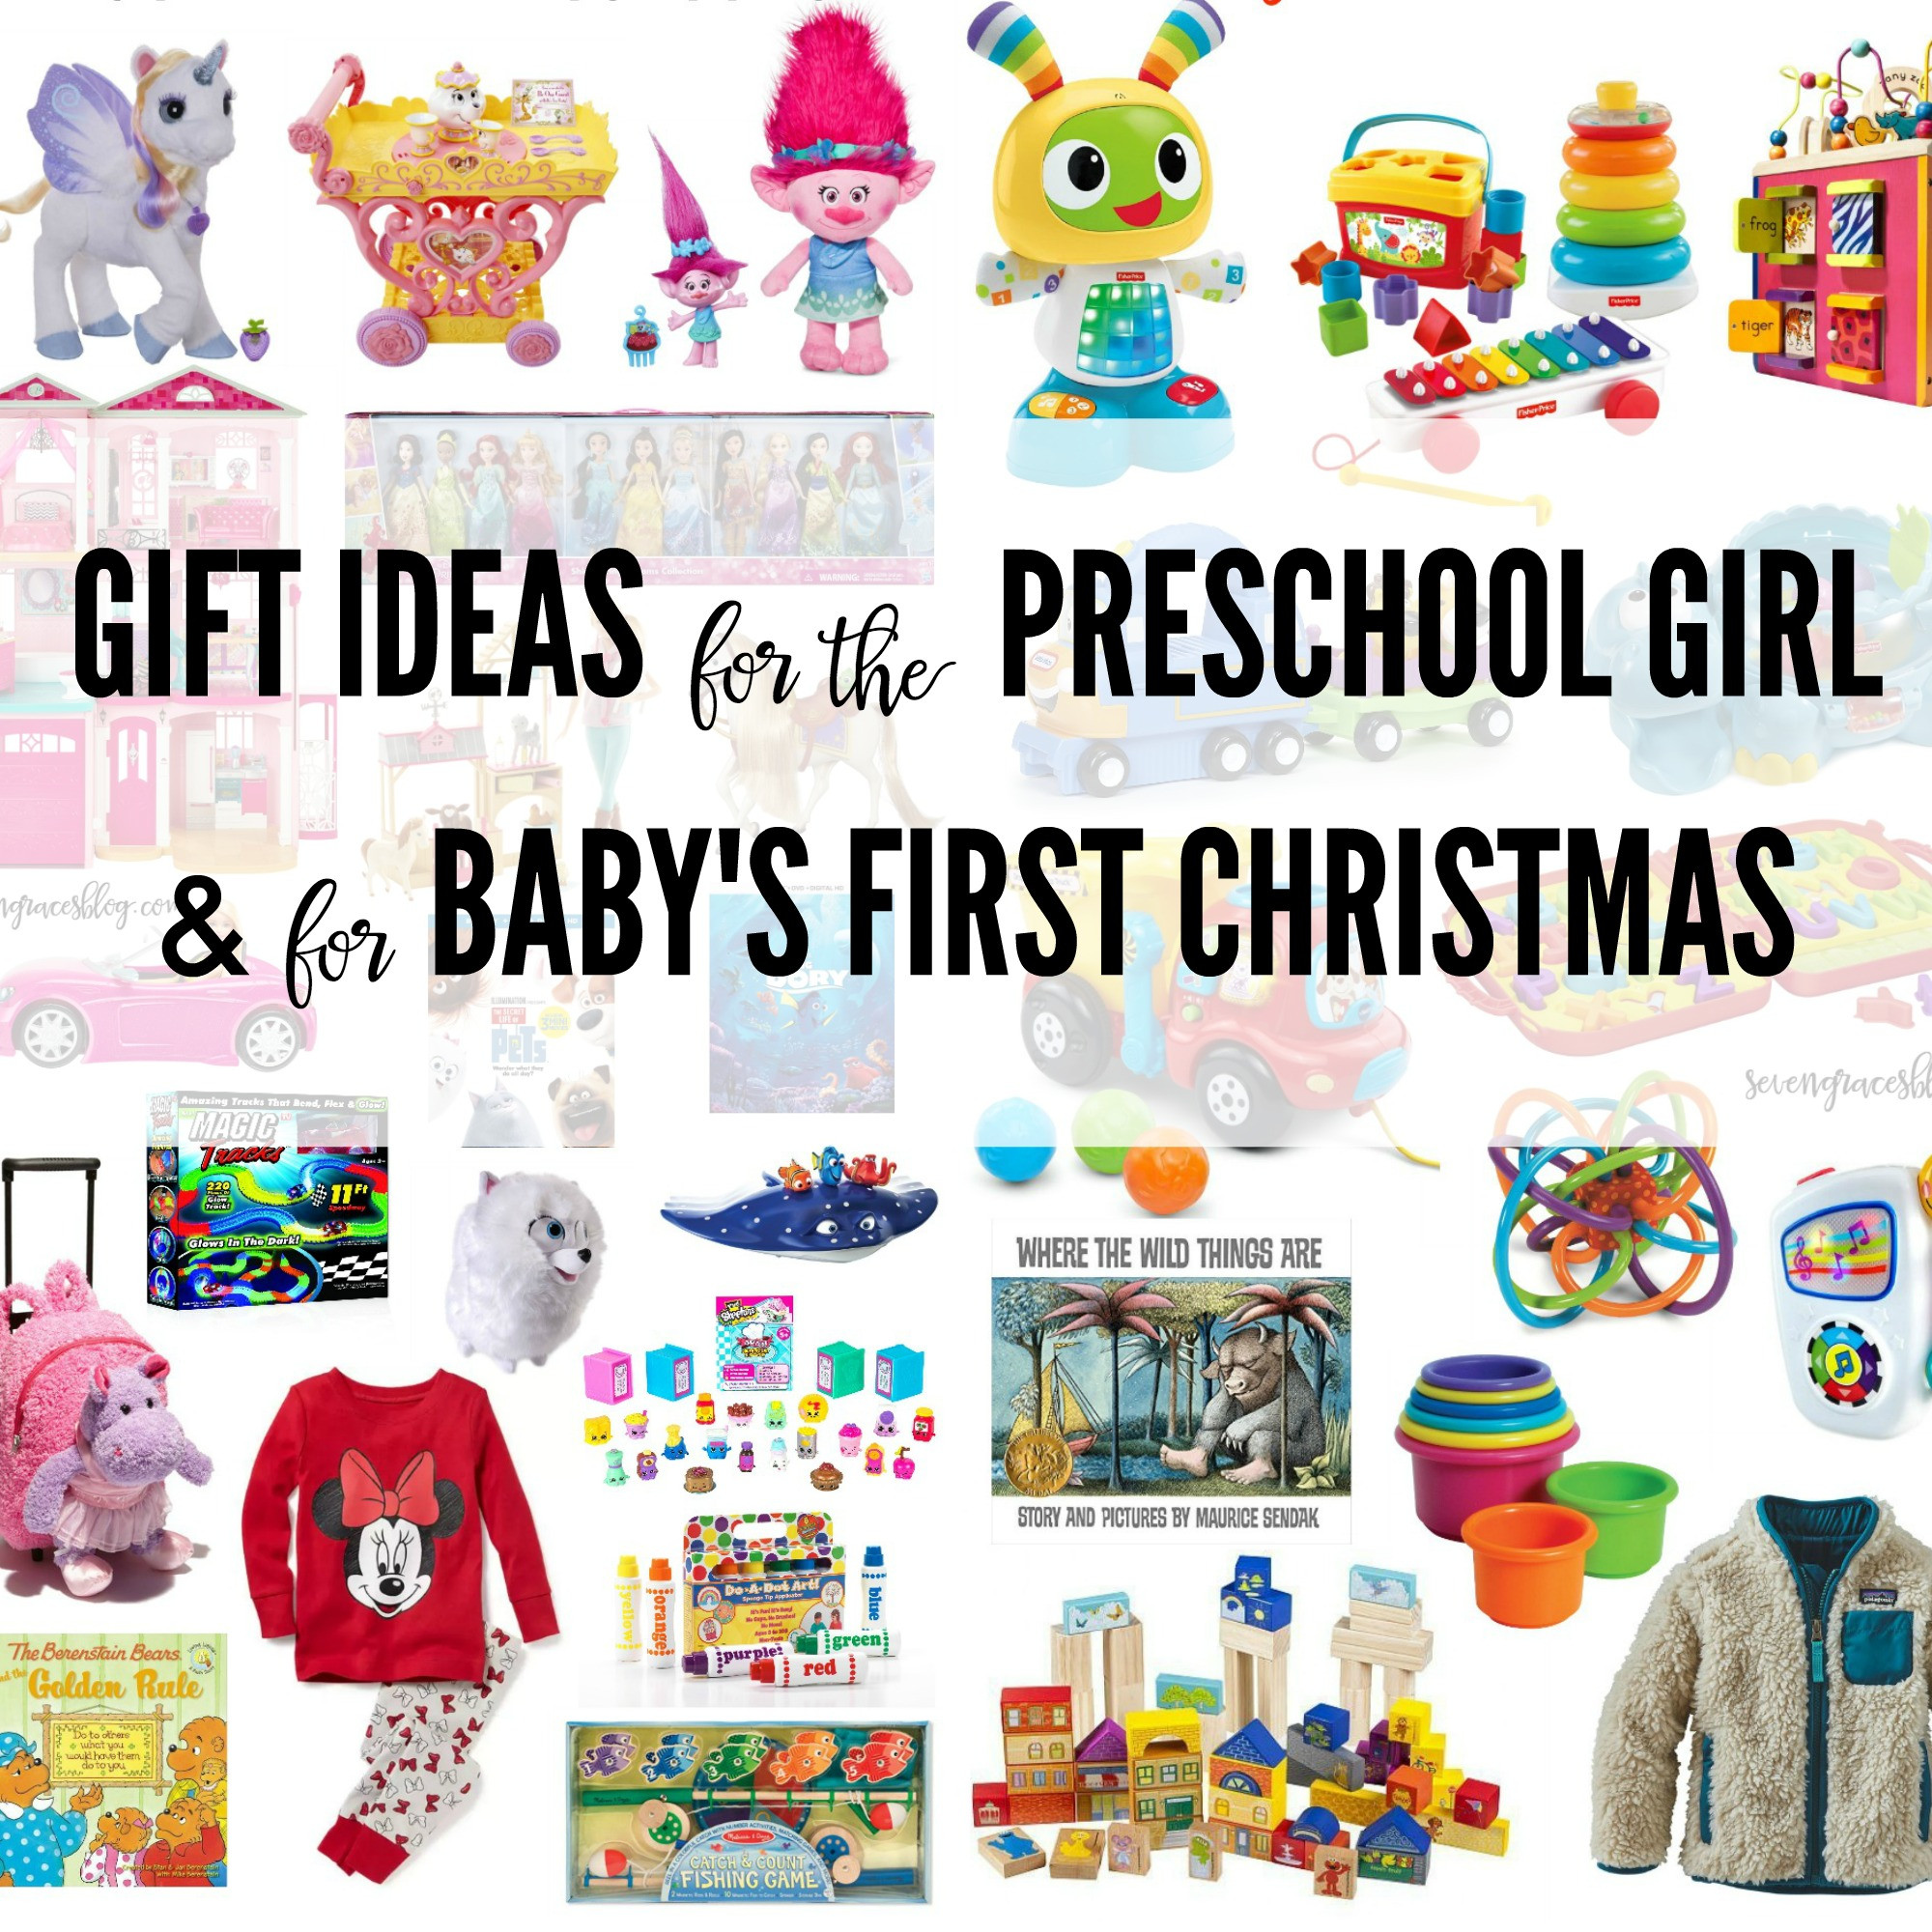 Baby 1St Christmas Gift Ideas
 Gift Ideas for the Preschool Girl and for Baby s First